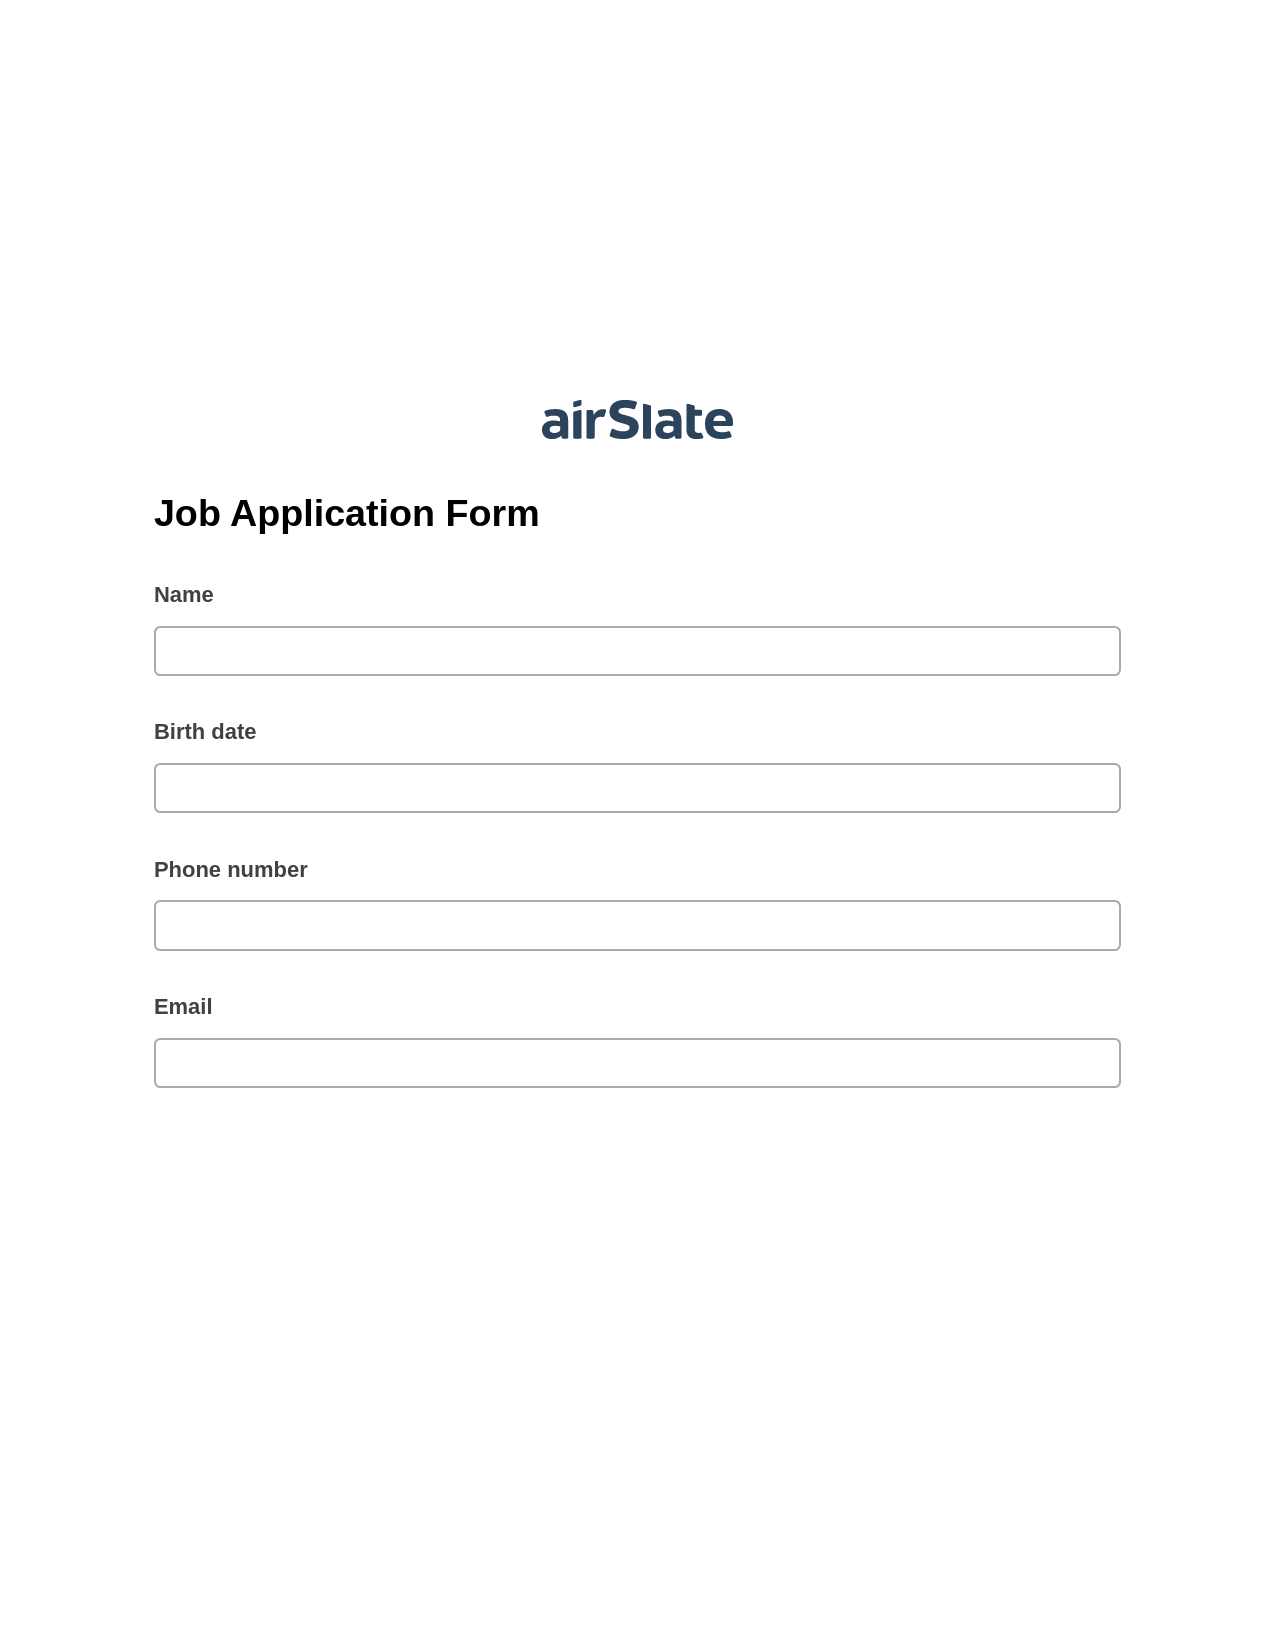 Job Application Form Pre-fill from NetSuite Records Bot, Audit Trail Bot, Export to Smartsheet